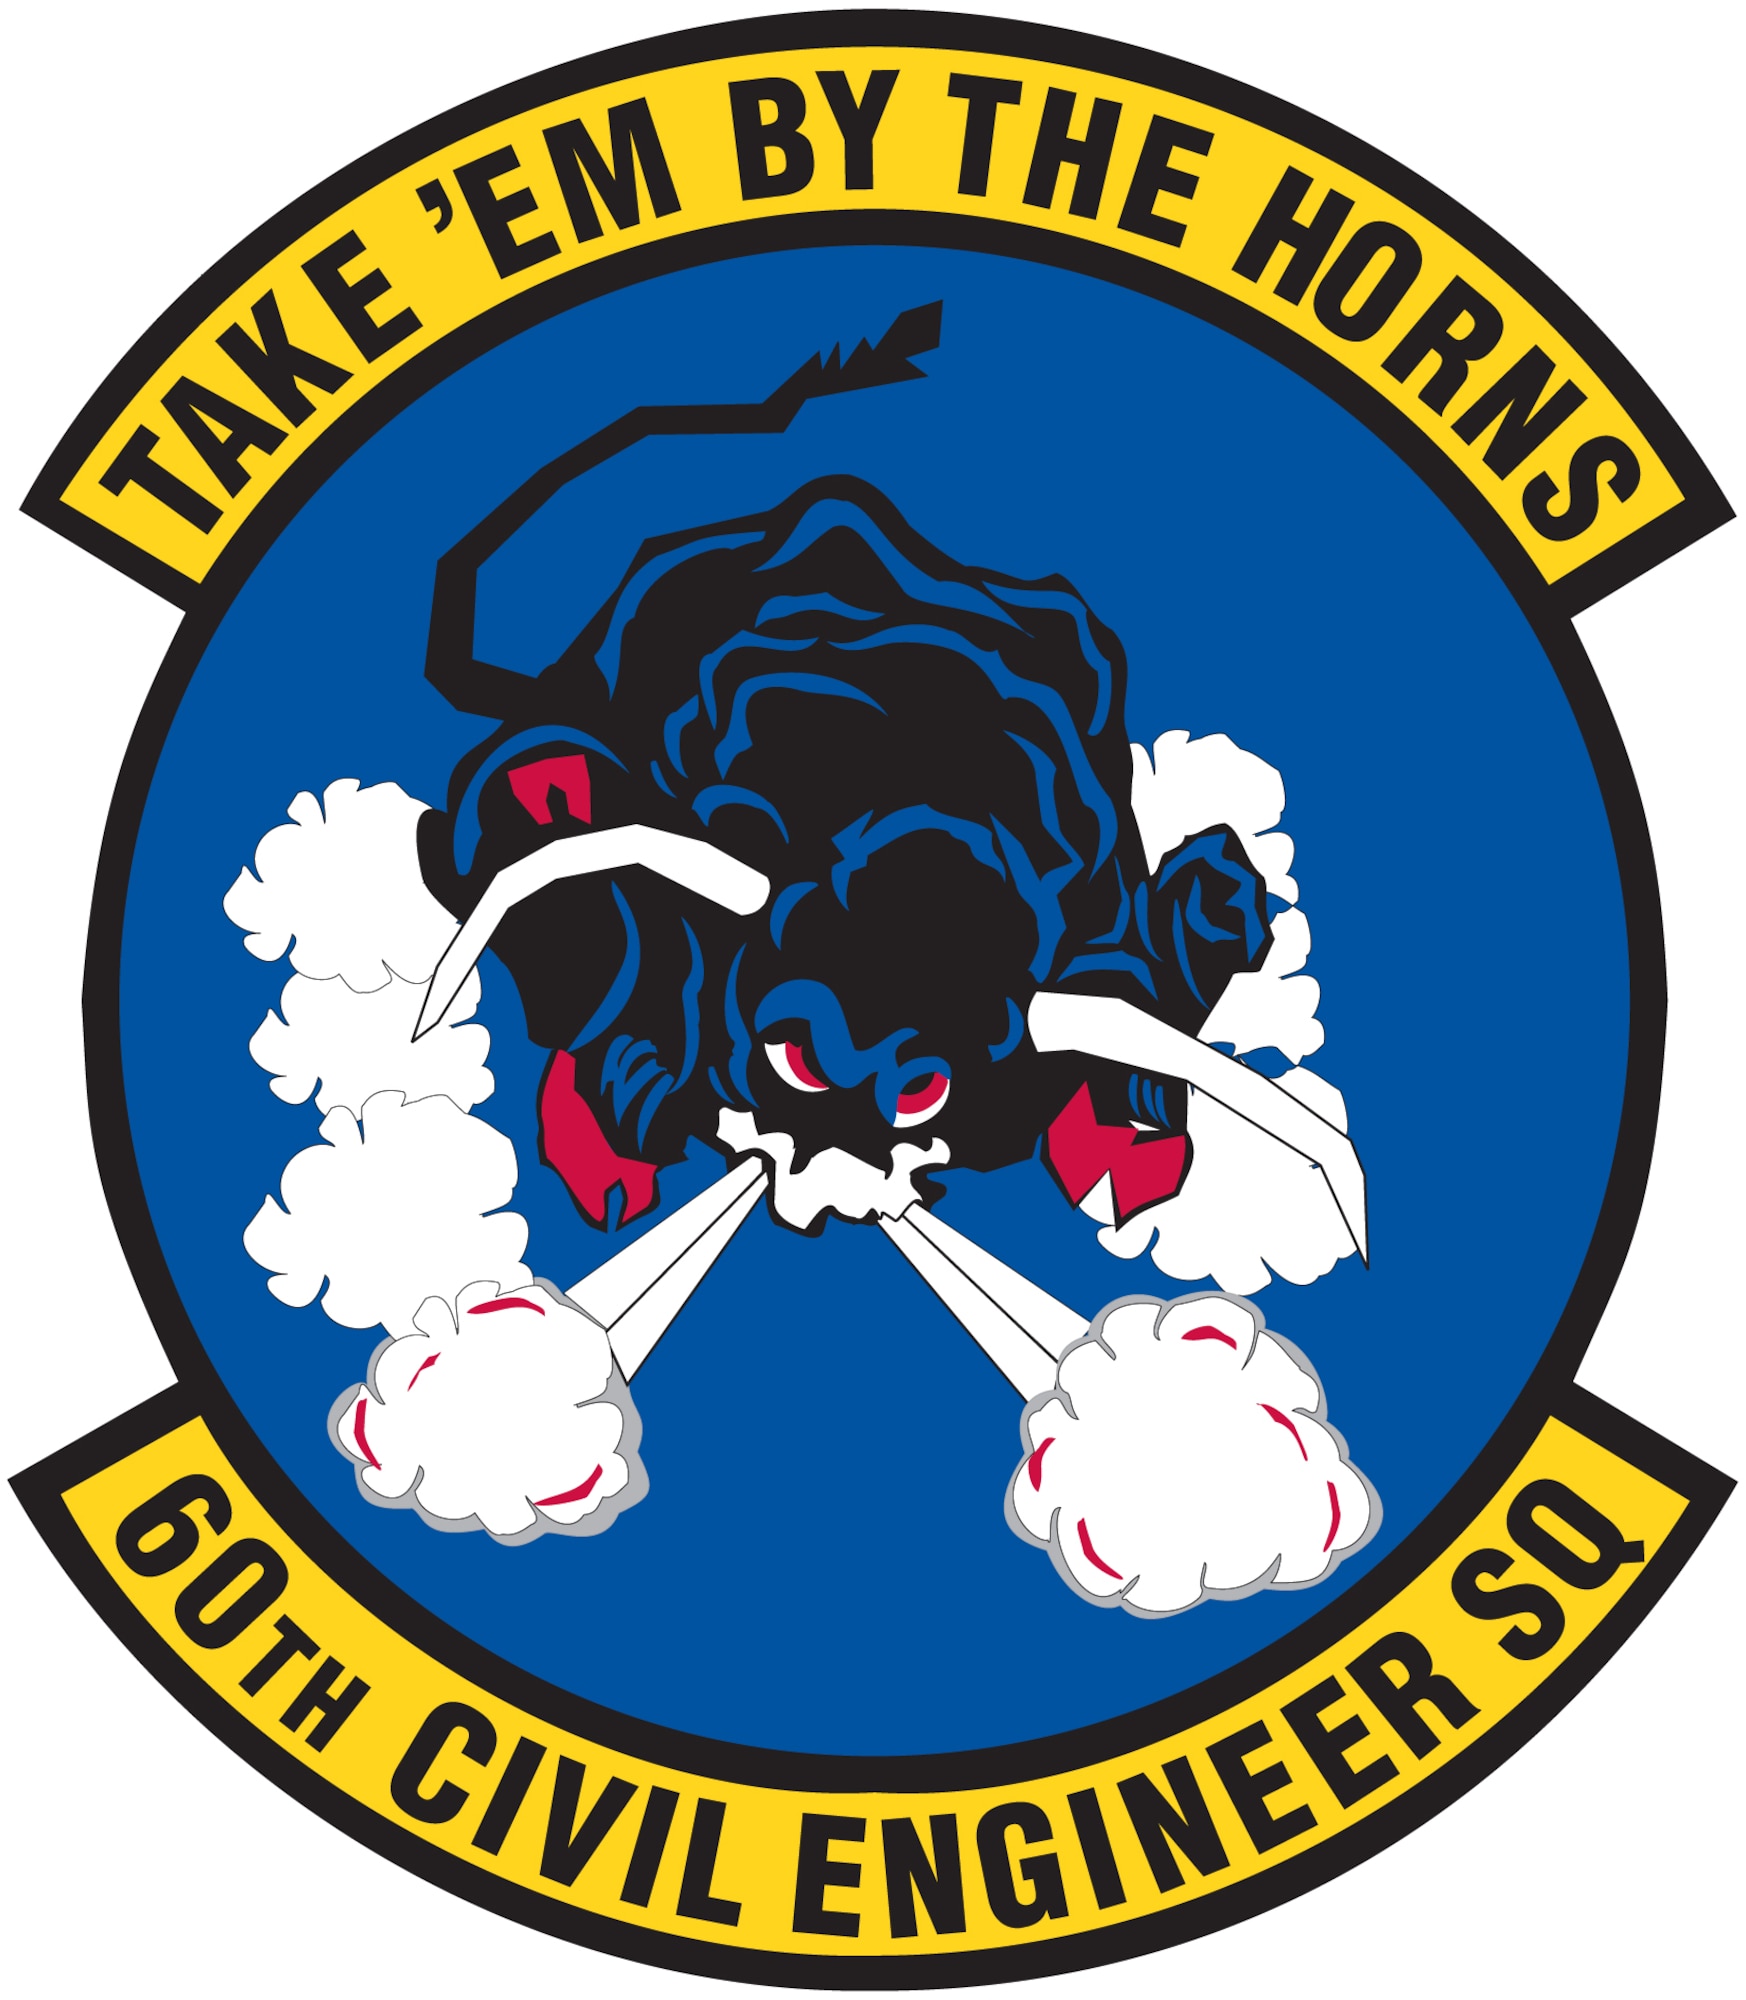 U.S. Air Force Graphic